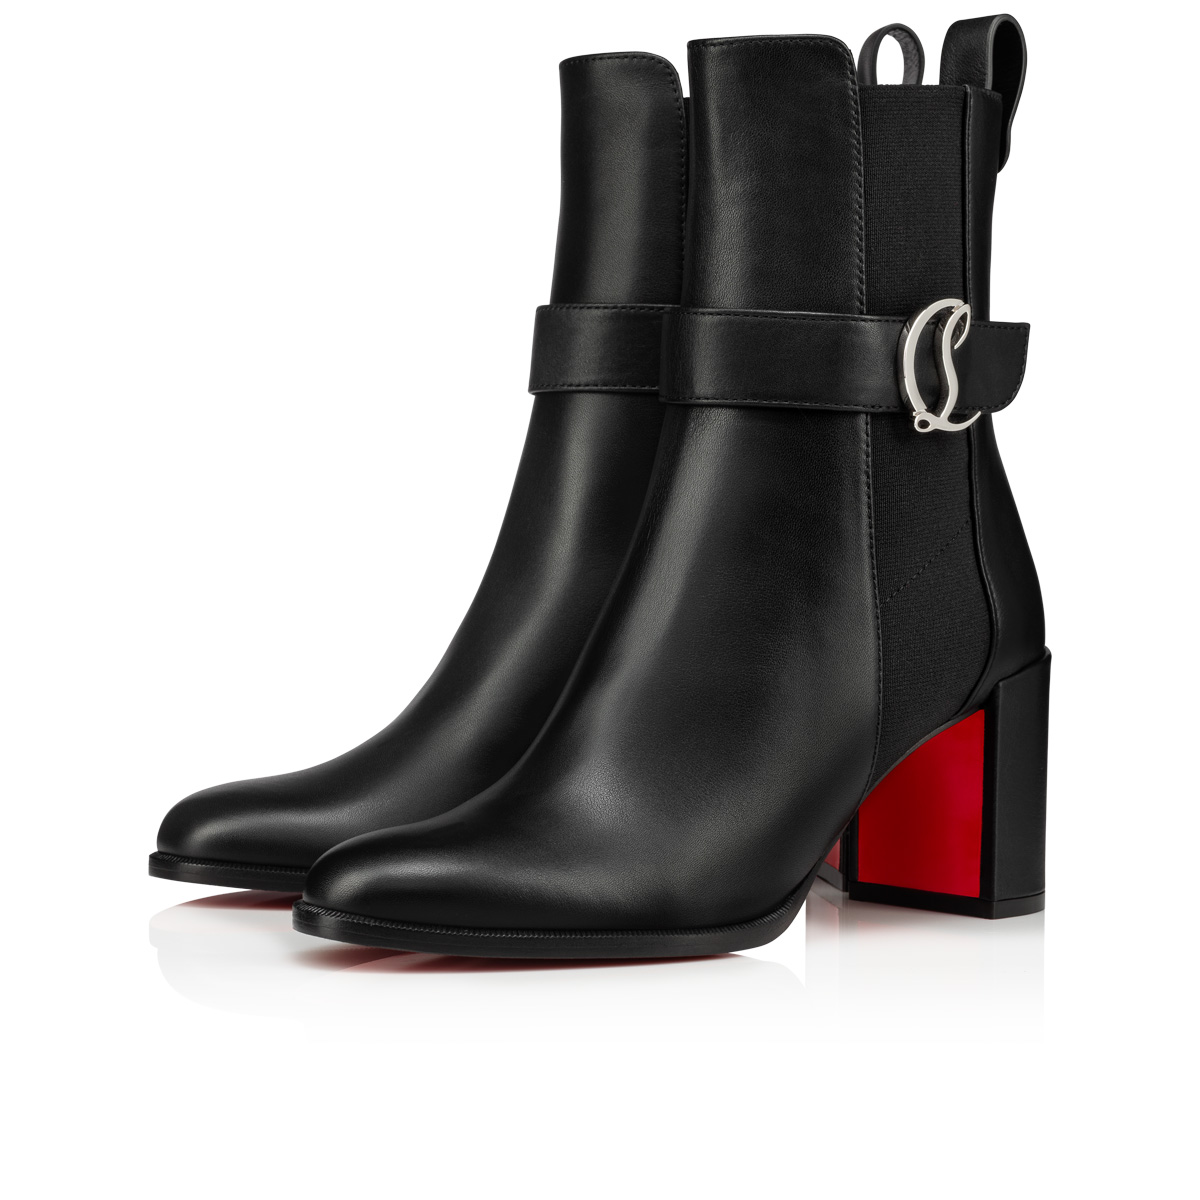 CL Chelsea Booty - 70 mm Low boots - Calf leather - Black